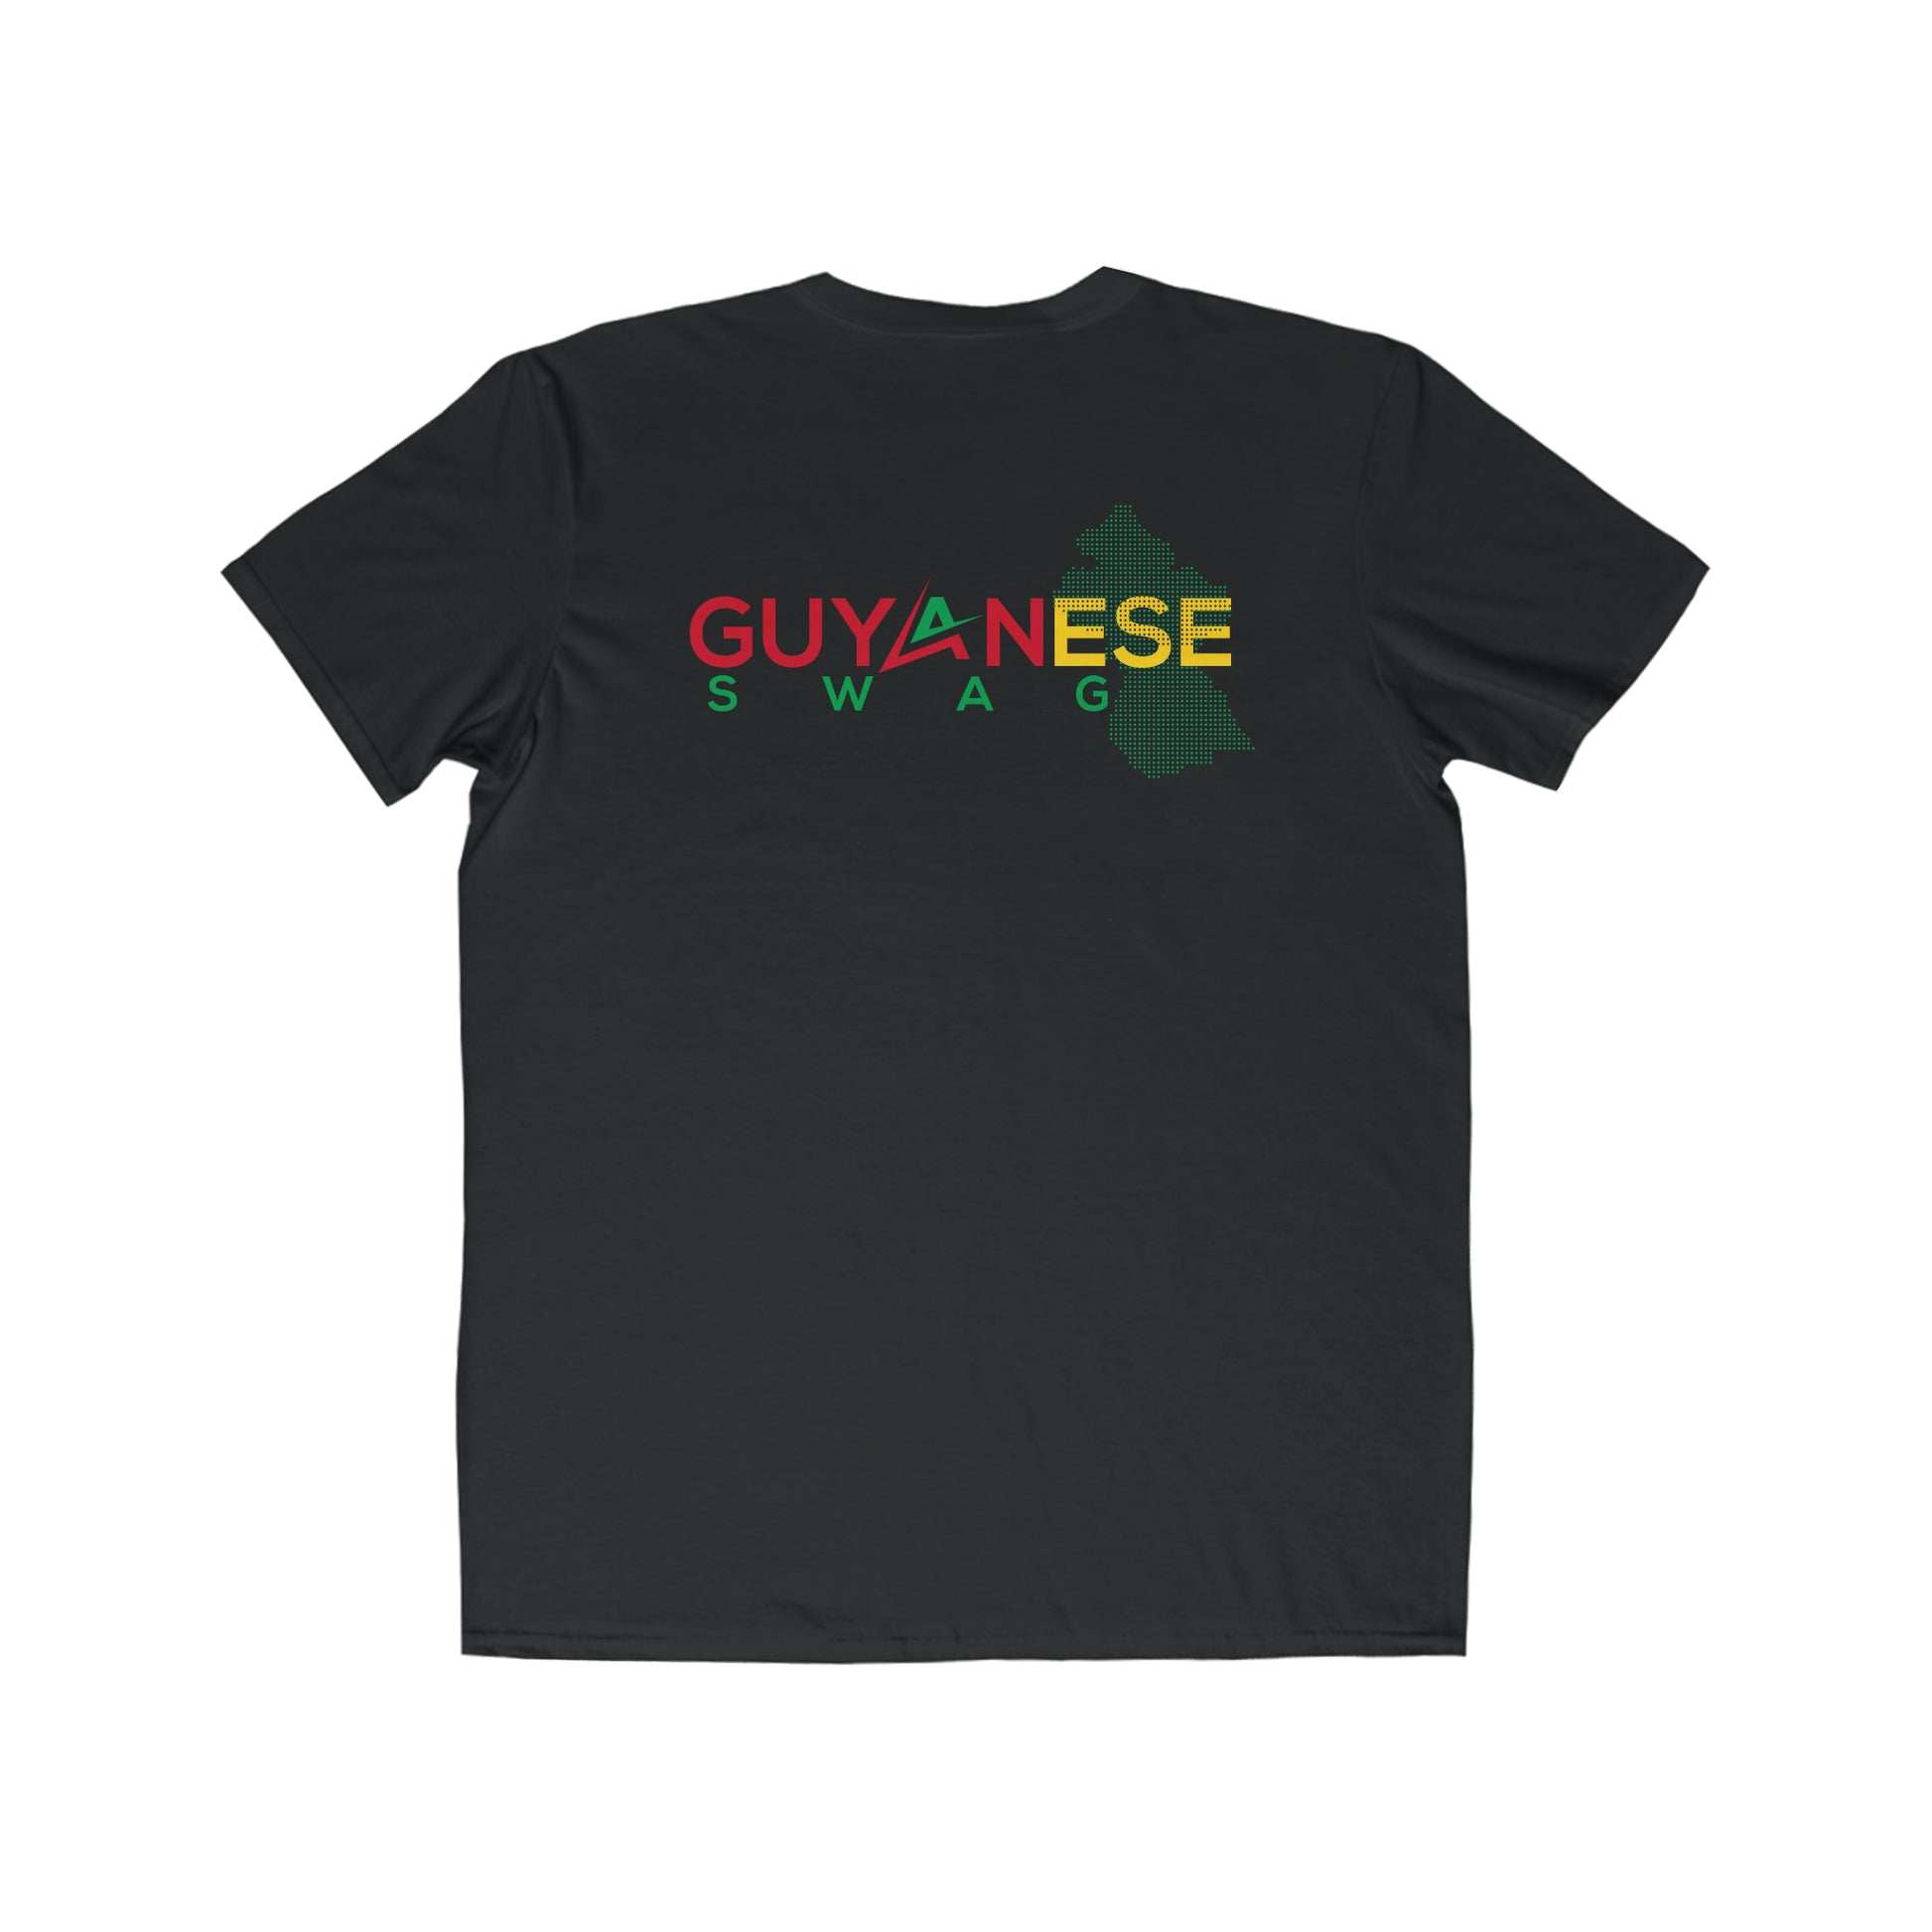 Protector of Women & Children Sexual Abuse Awareness Men's Lightweight Fashion Tee by Guyanese Swag